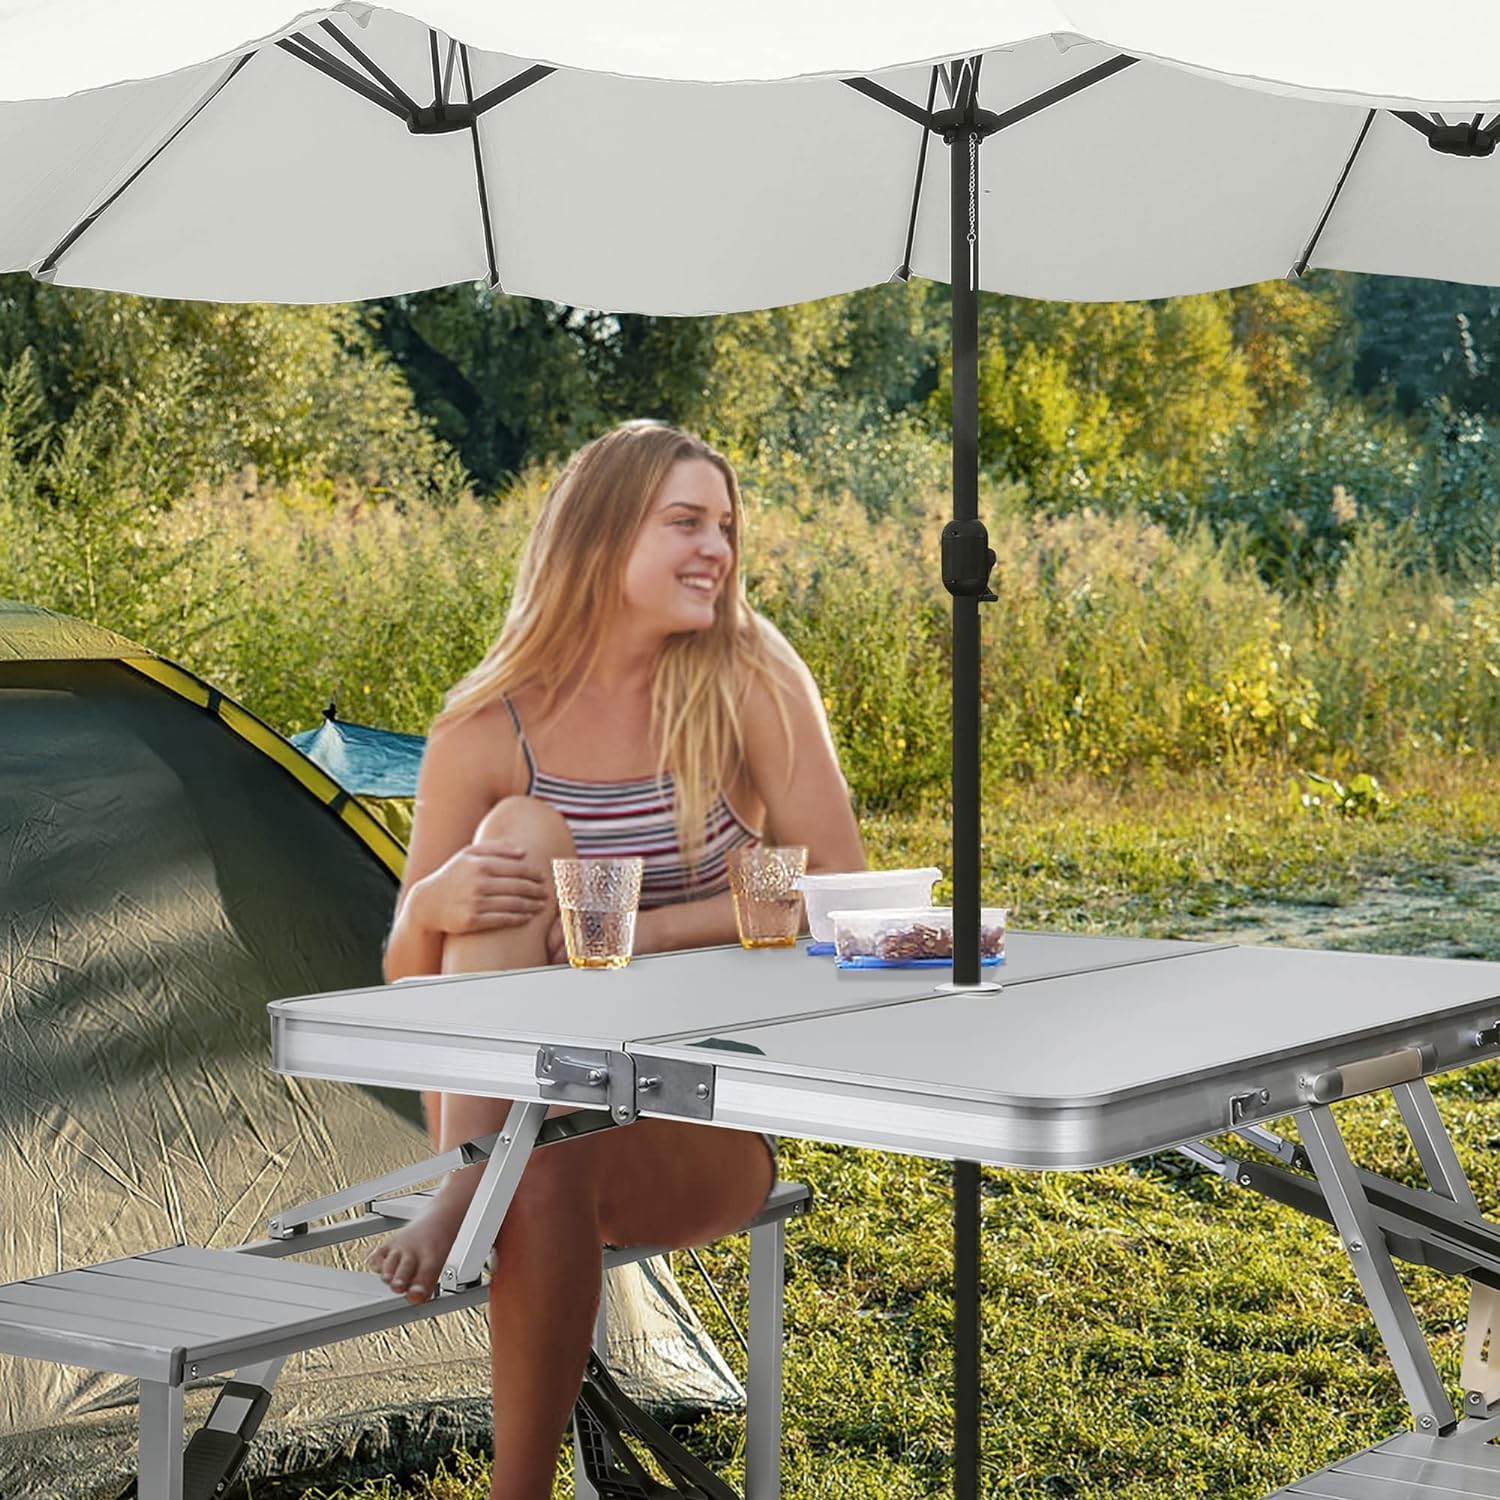 Portable Folding Camping Picnic Table Chair Set for 4 with Seats Chairs and Umbrella Hole